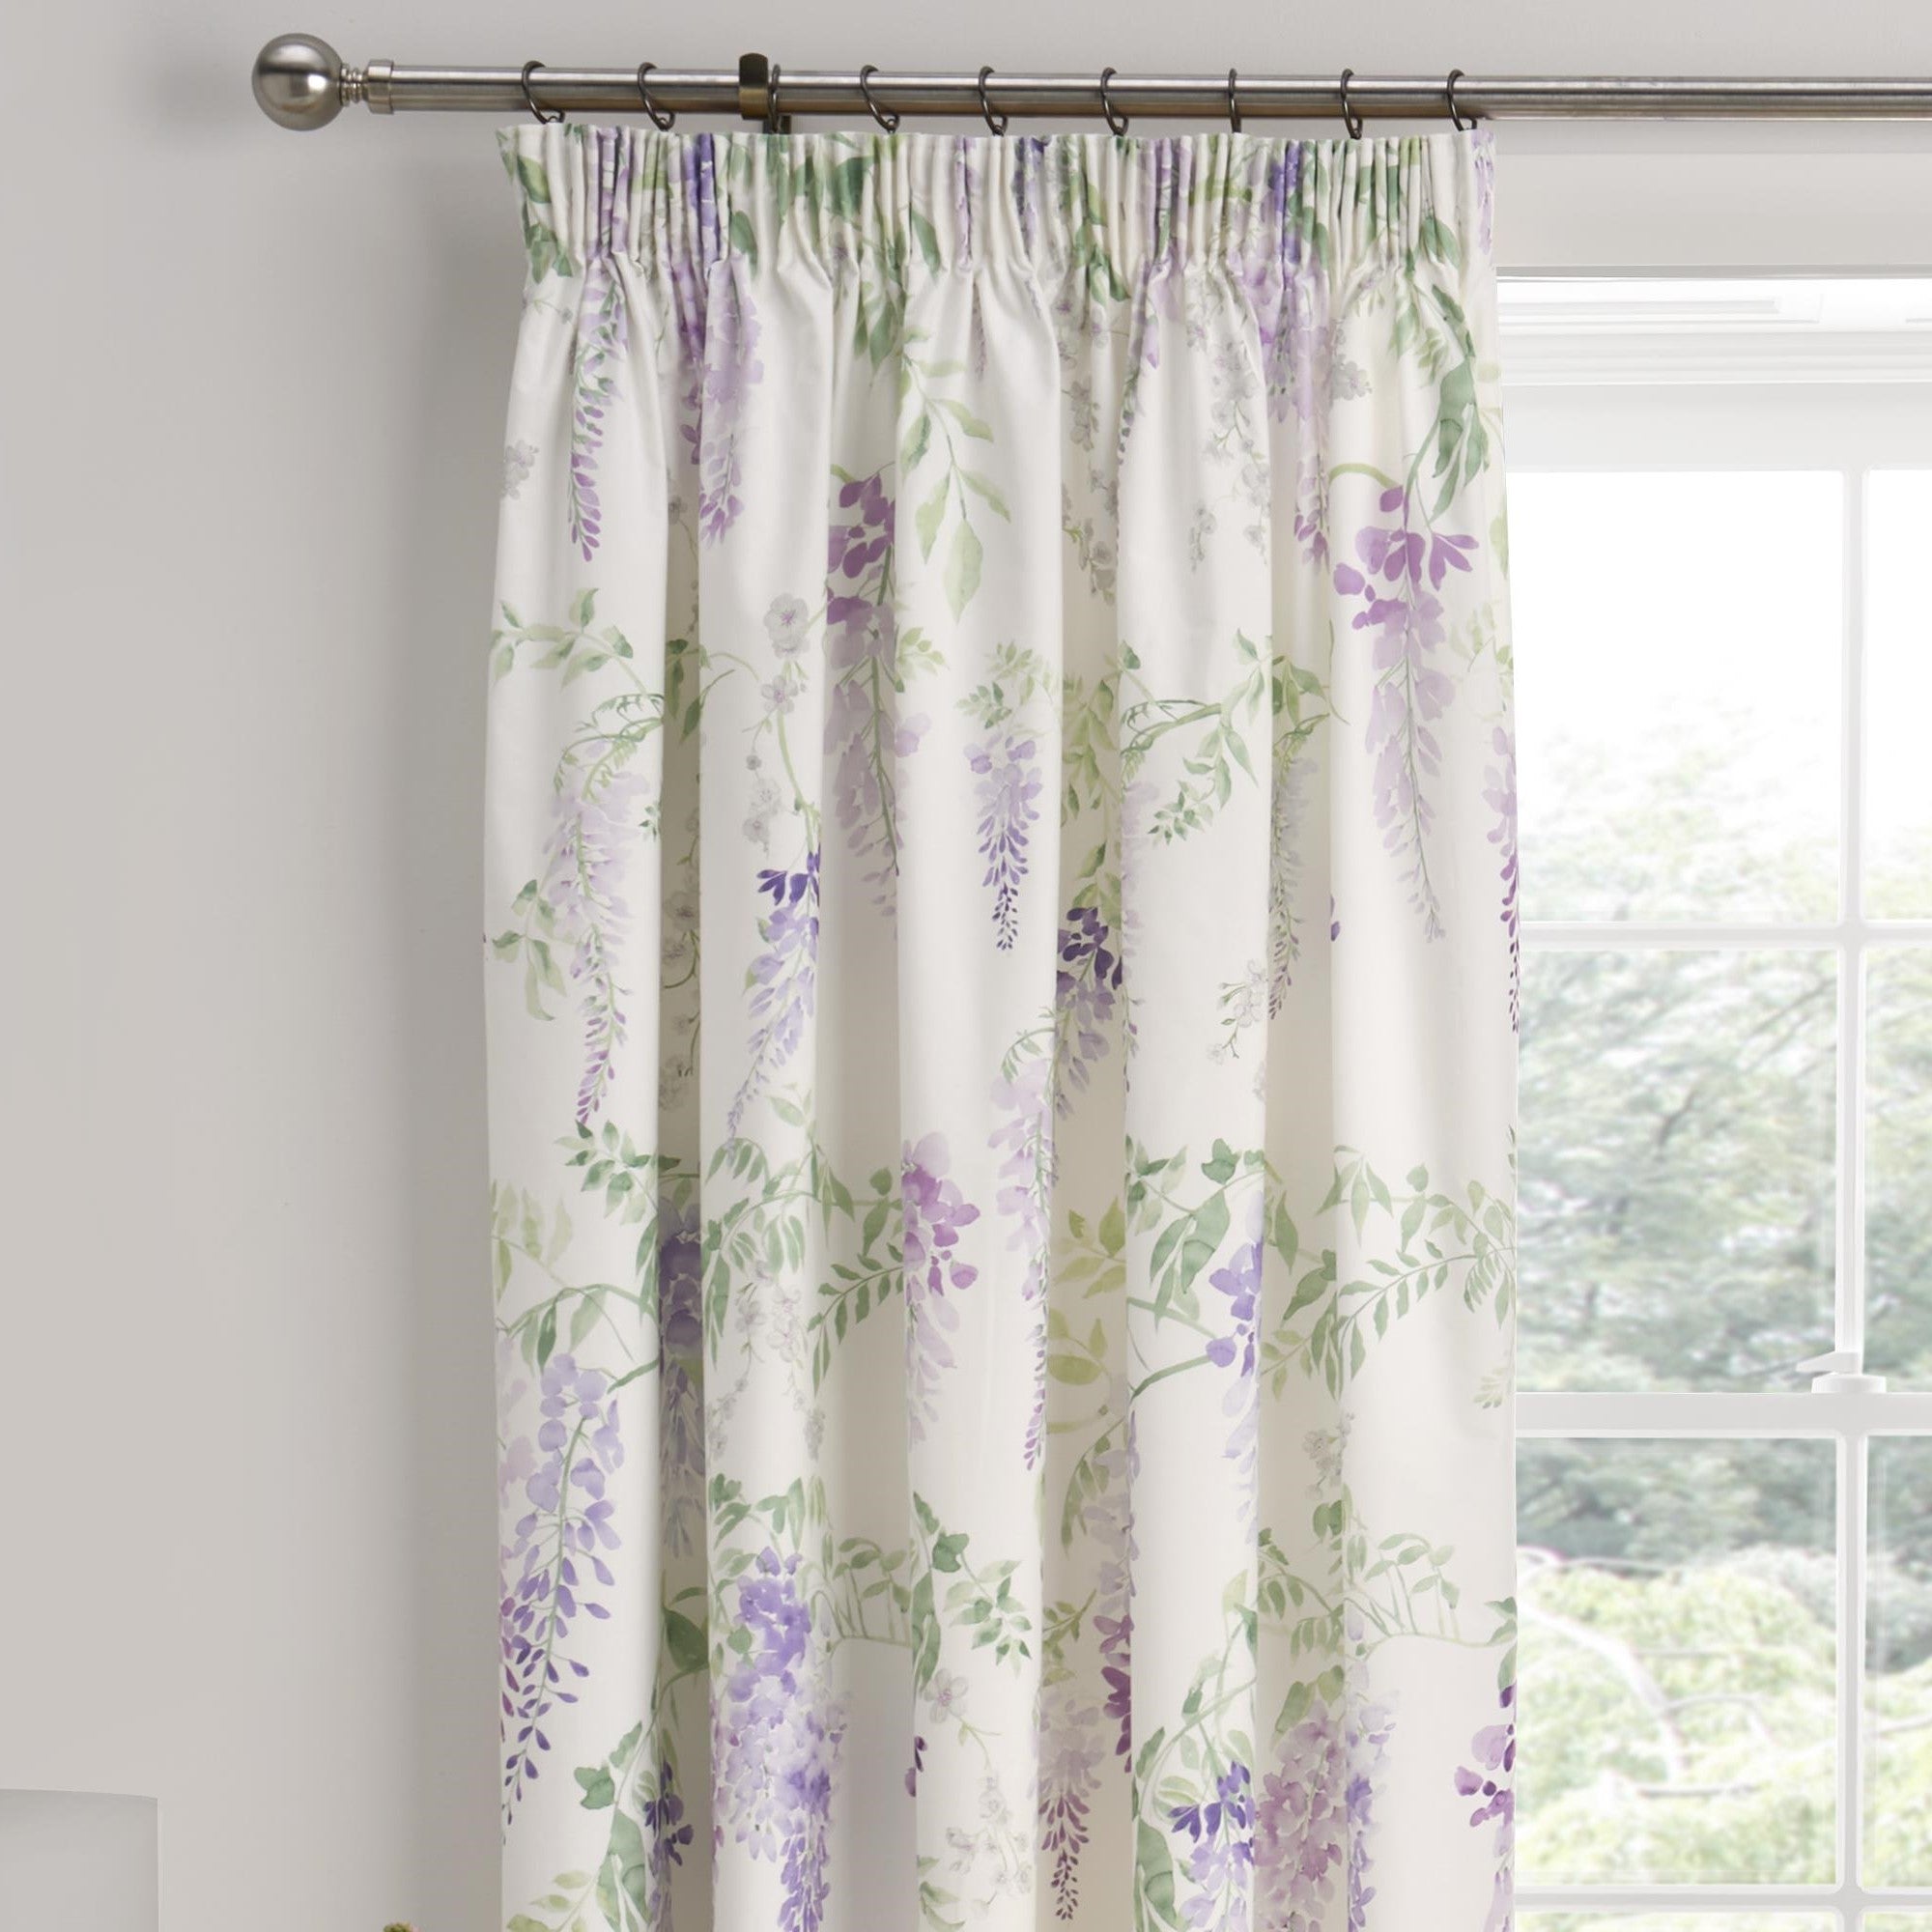 Pair of Pencil Pleat Curtains With Tie-Backs Wisteria by Dreams & Drapes Design in Lilac